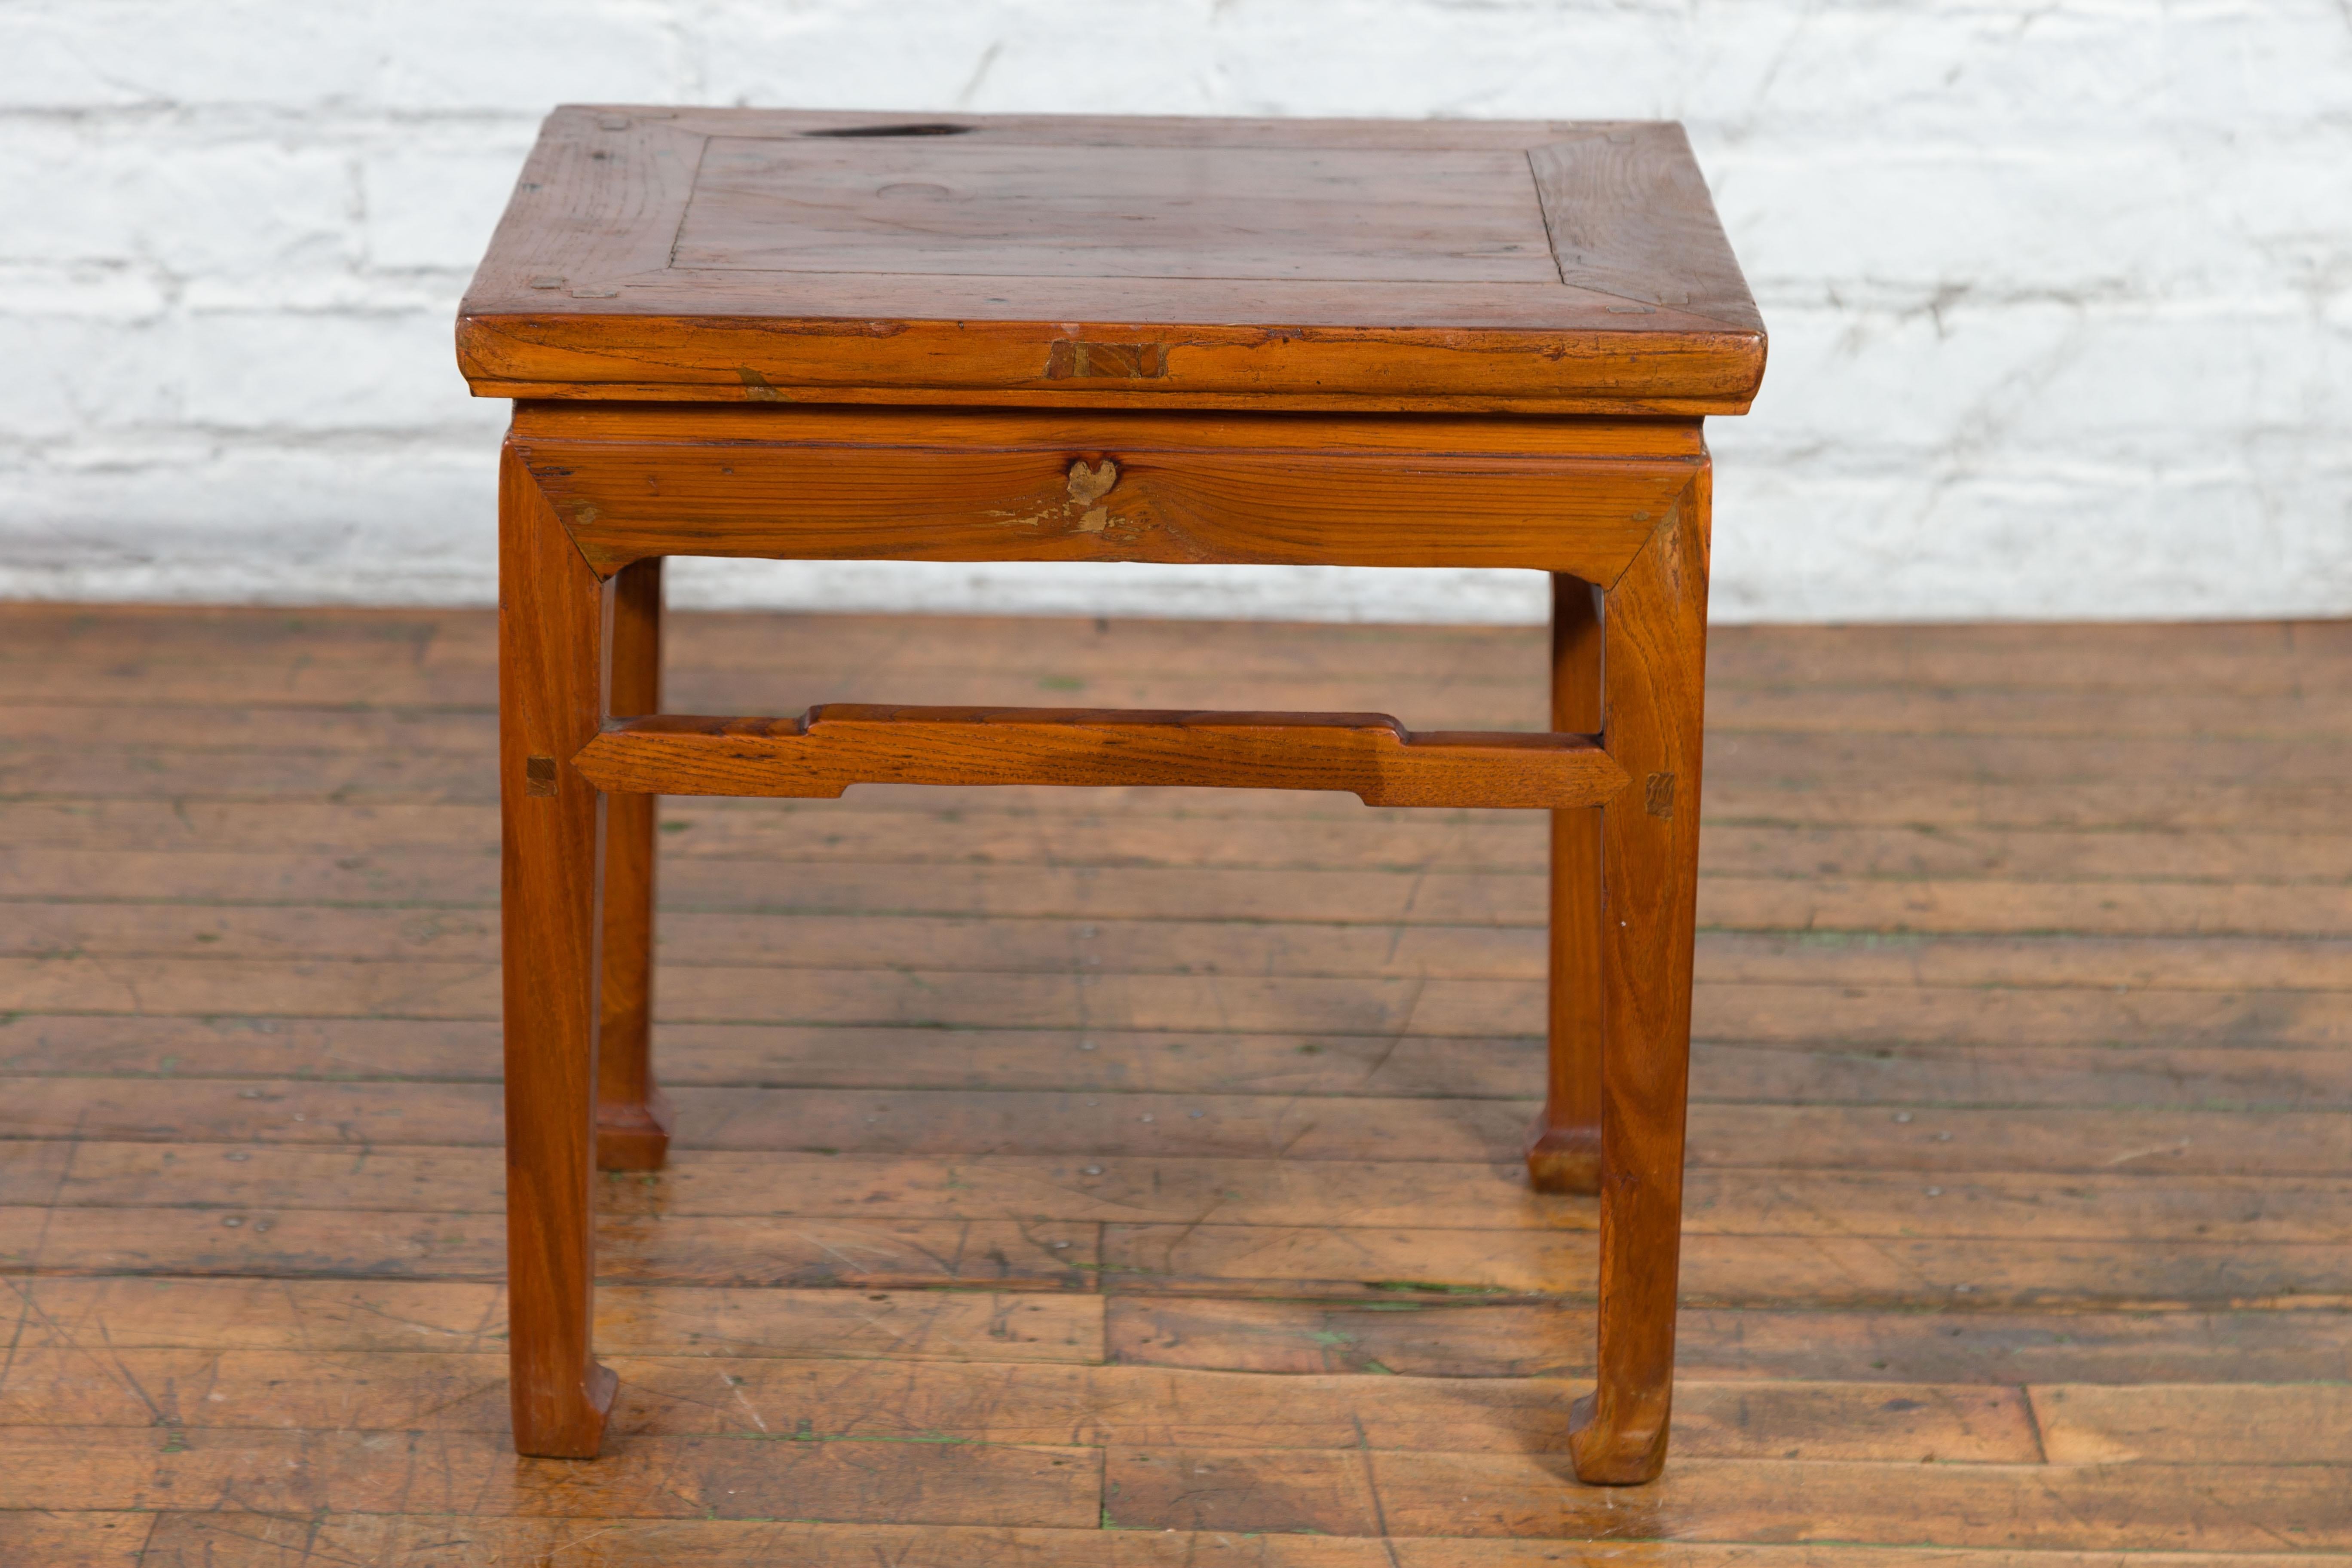 Chinese Qing Dynasty 19th Century Side Table with Humpback Stretchers In Good Condition For Sale In Yonkers, NY